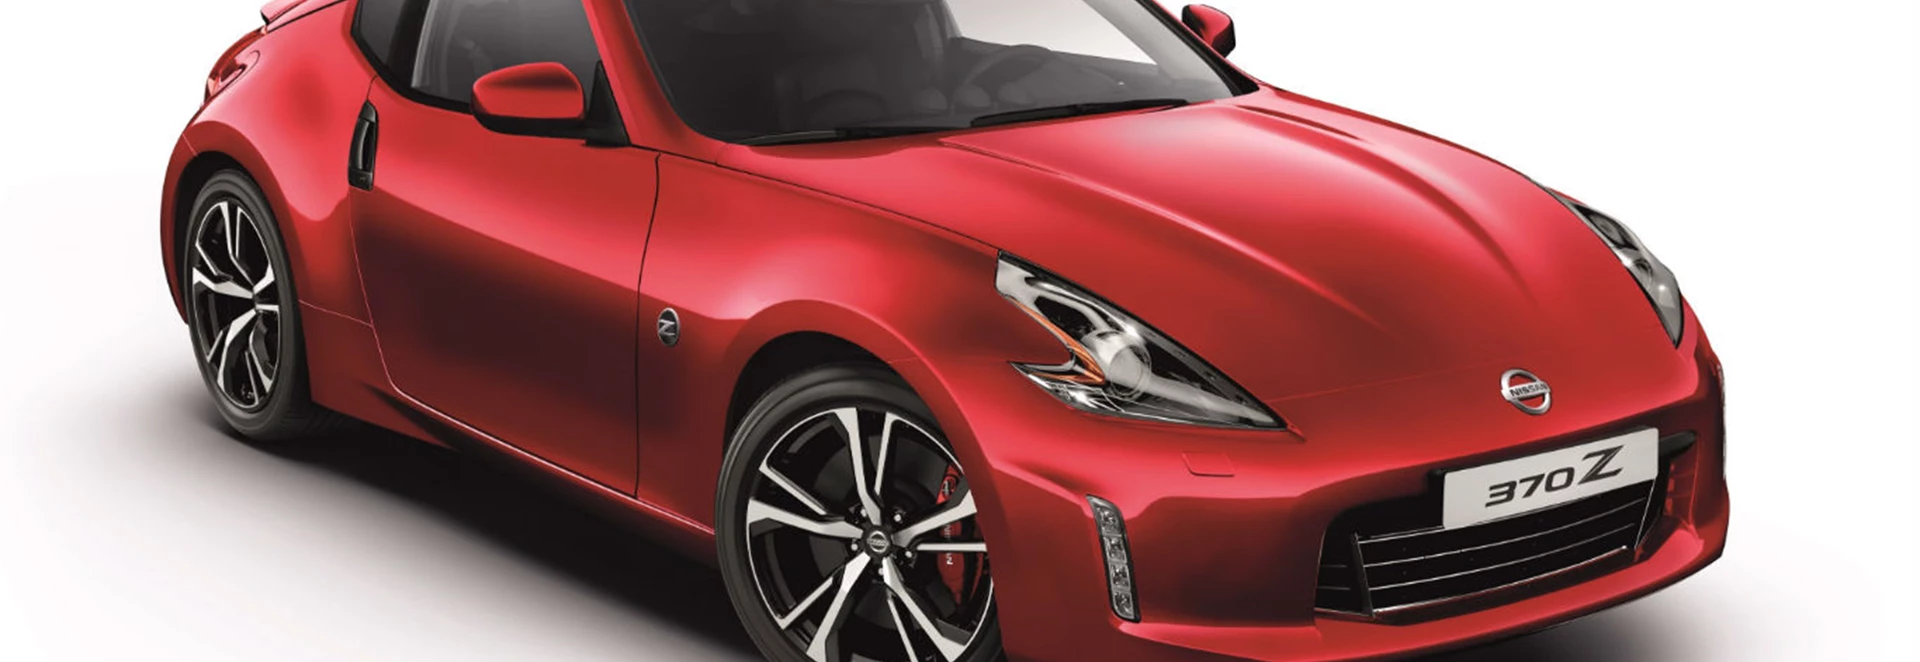 Nissan 370Z updated for 2018 